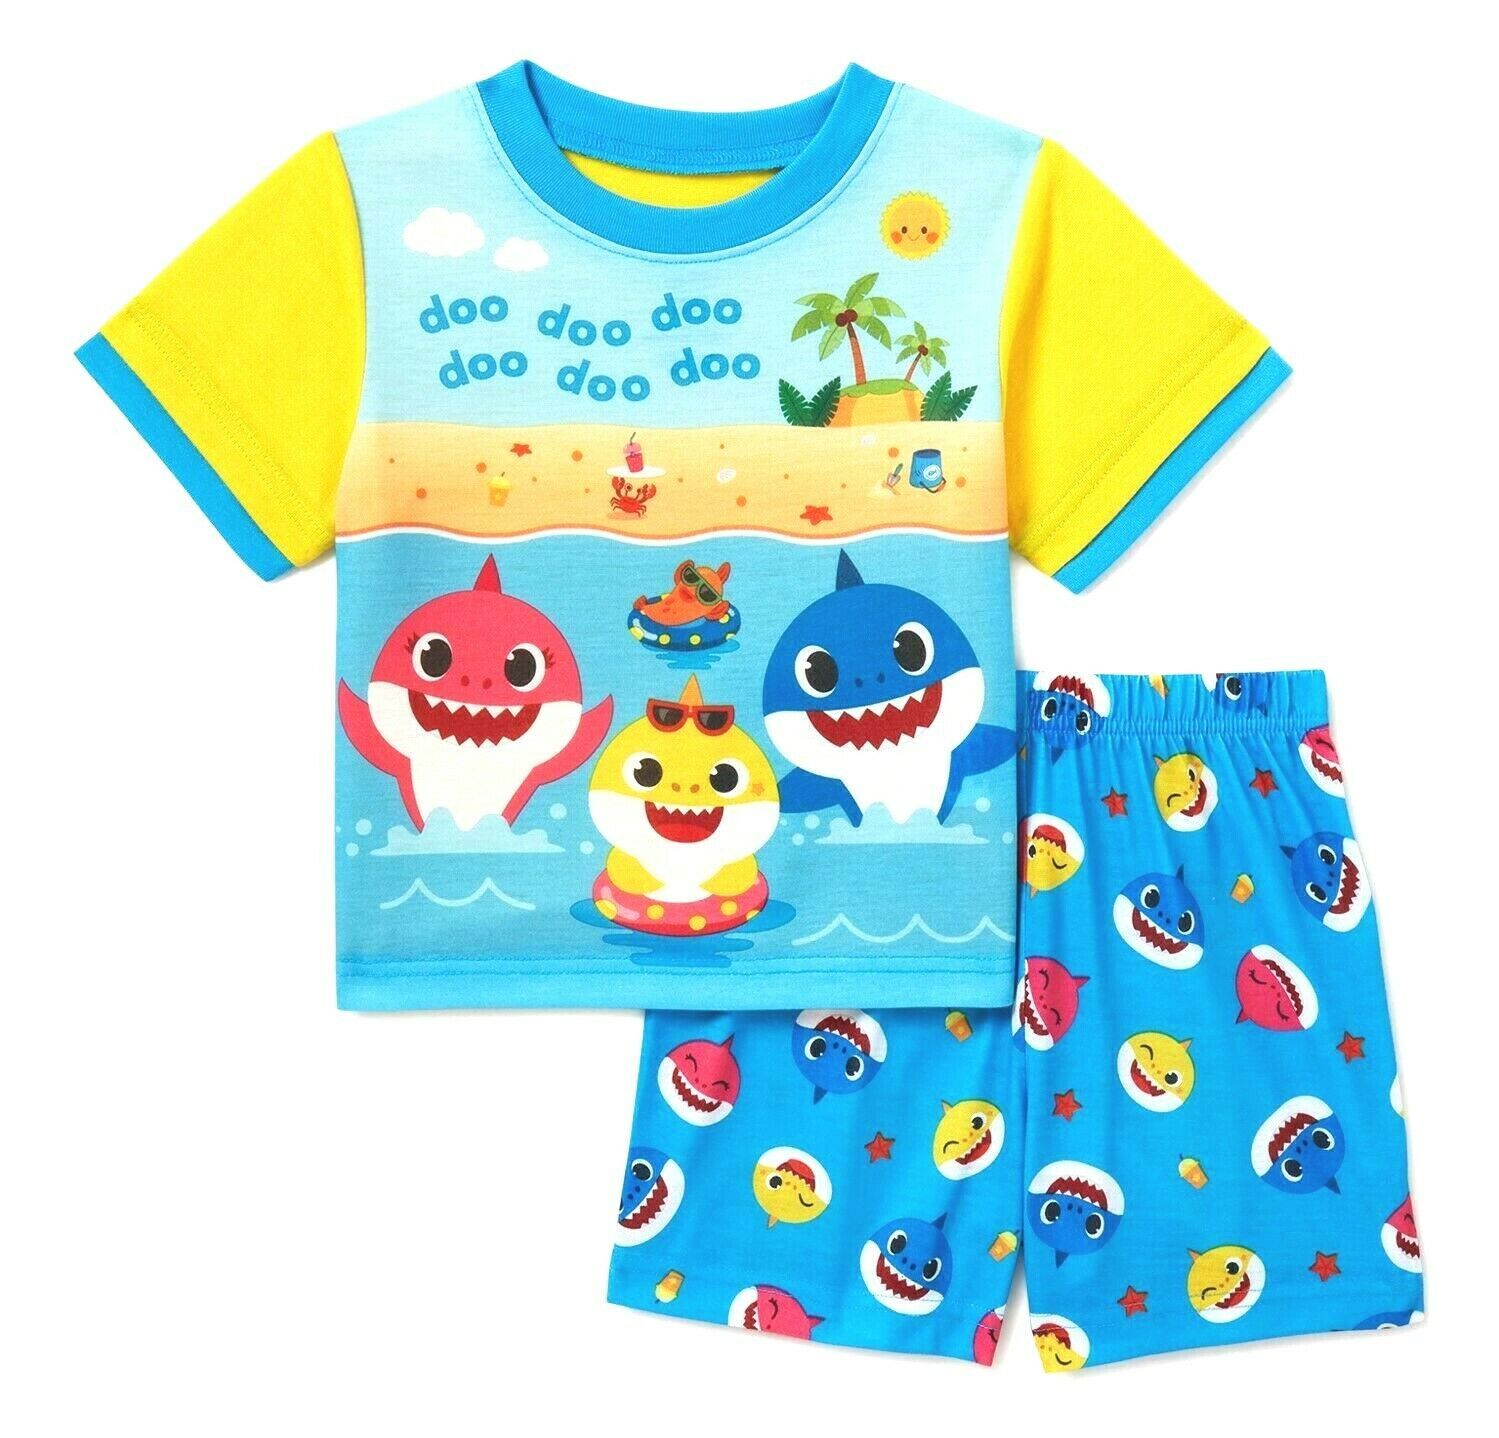 BABY SHARK MOMMY DADDY Pajamas Sleepwear Set Toddler's NWT Size 3T, 4T or 5T $26